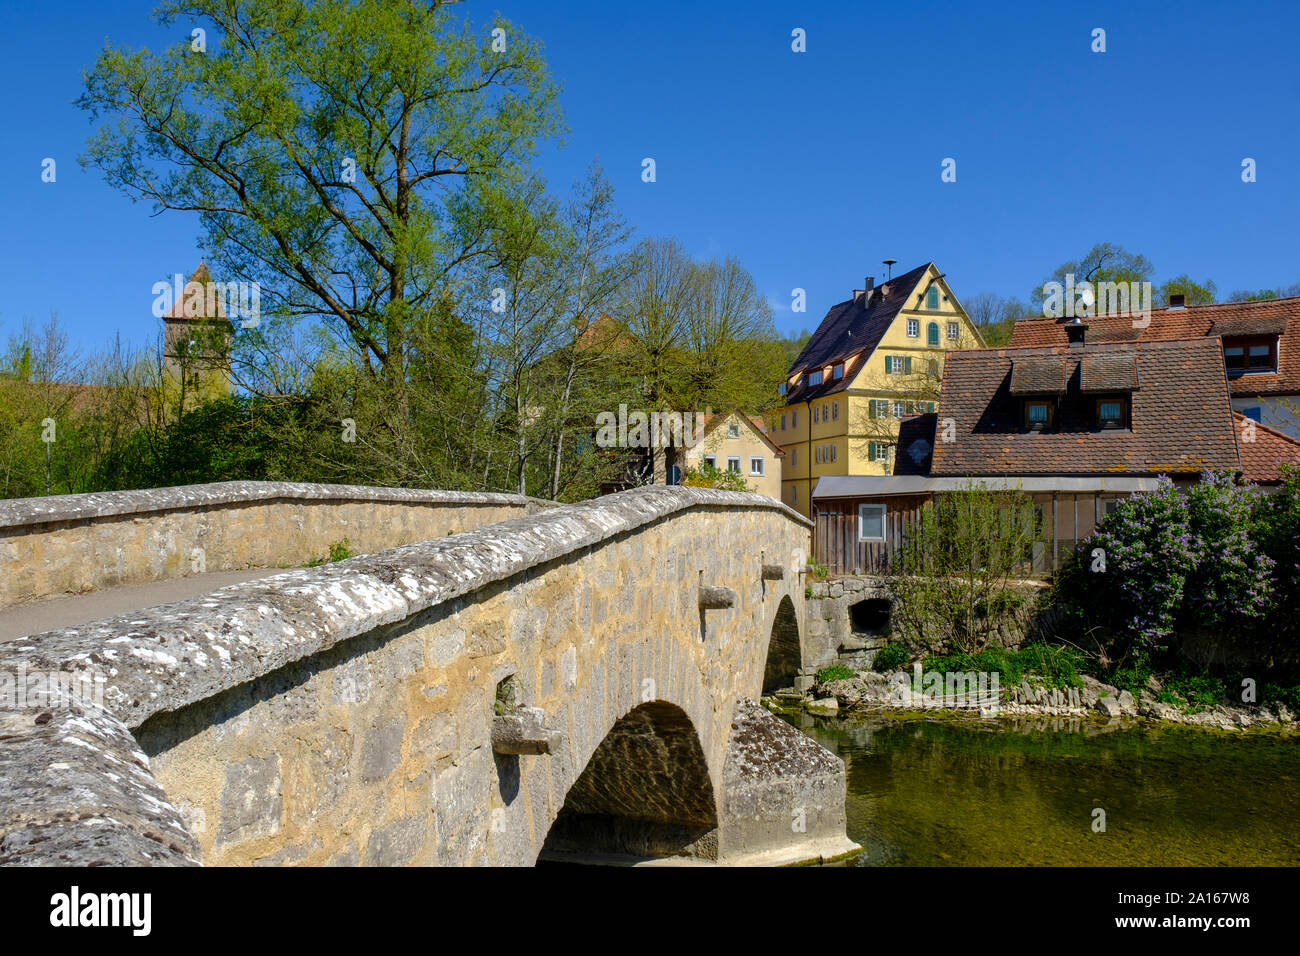 Old arch bridge over Tauber river with town houses in background, Rothenburg ob der Tauber, Bavaria, Germany Stock Photo